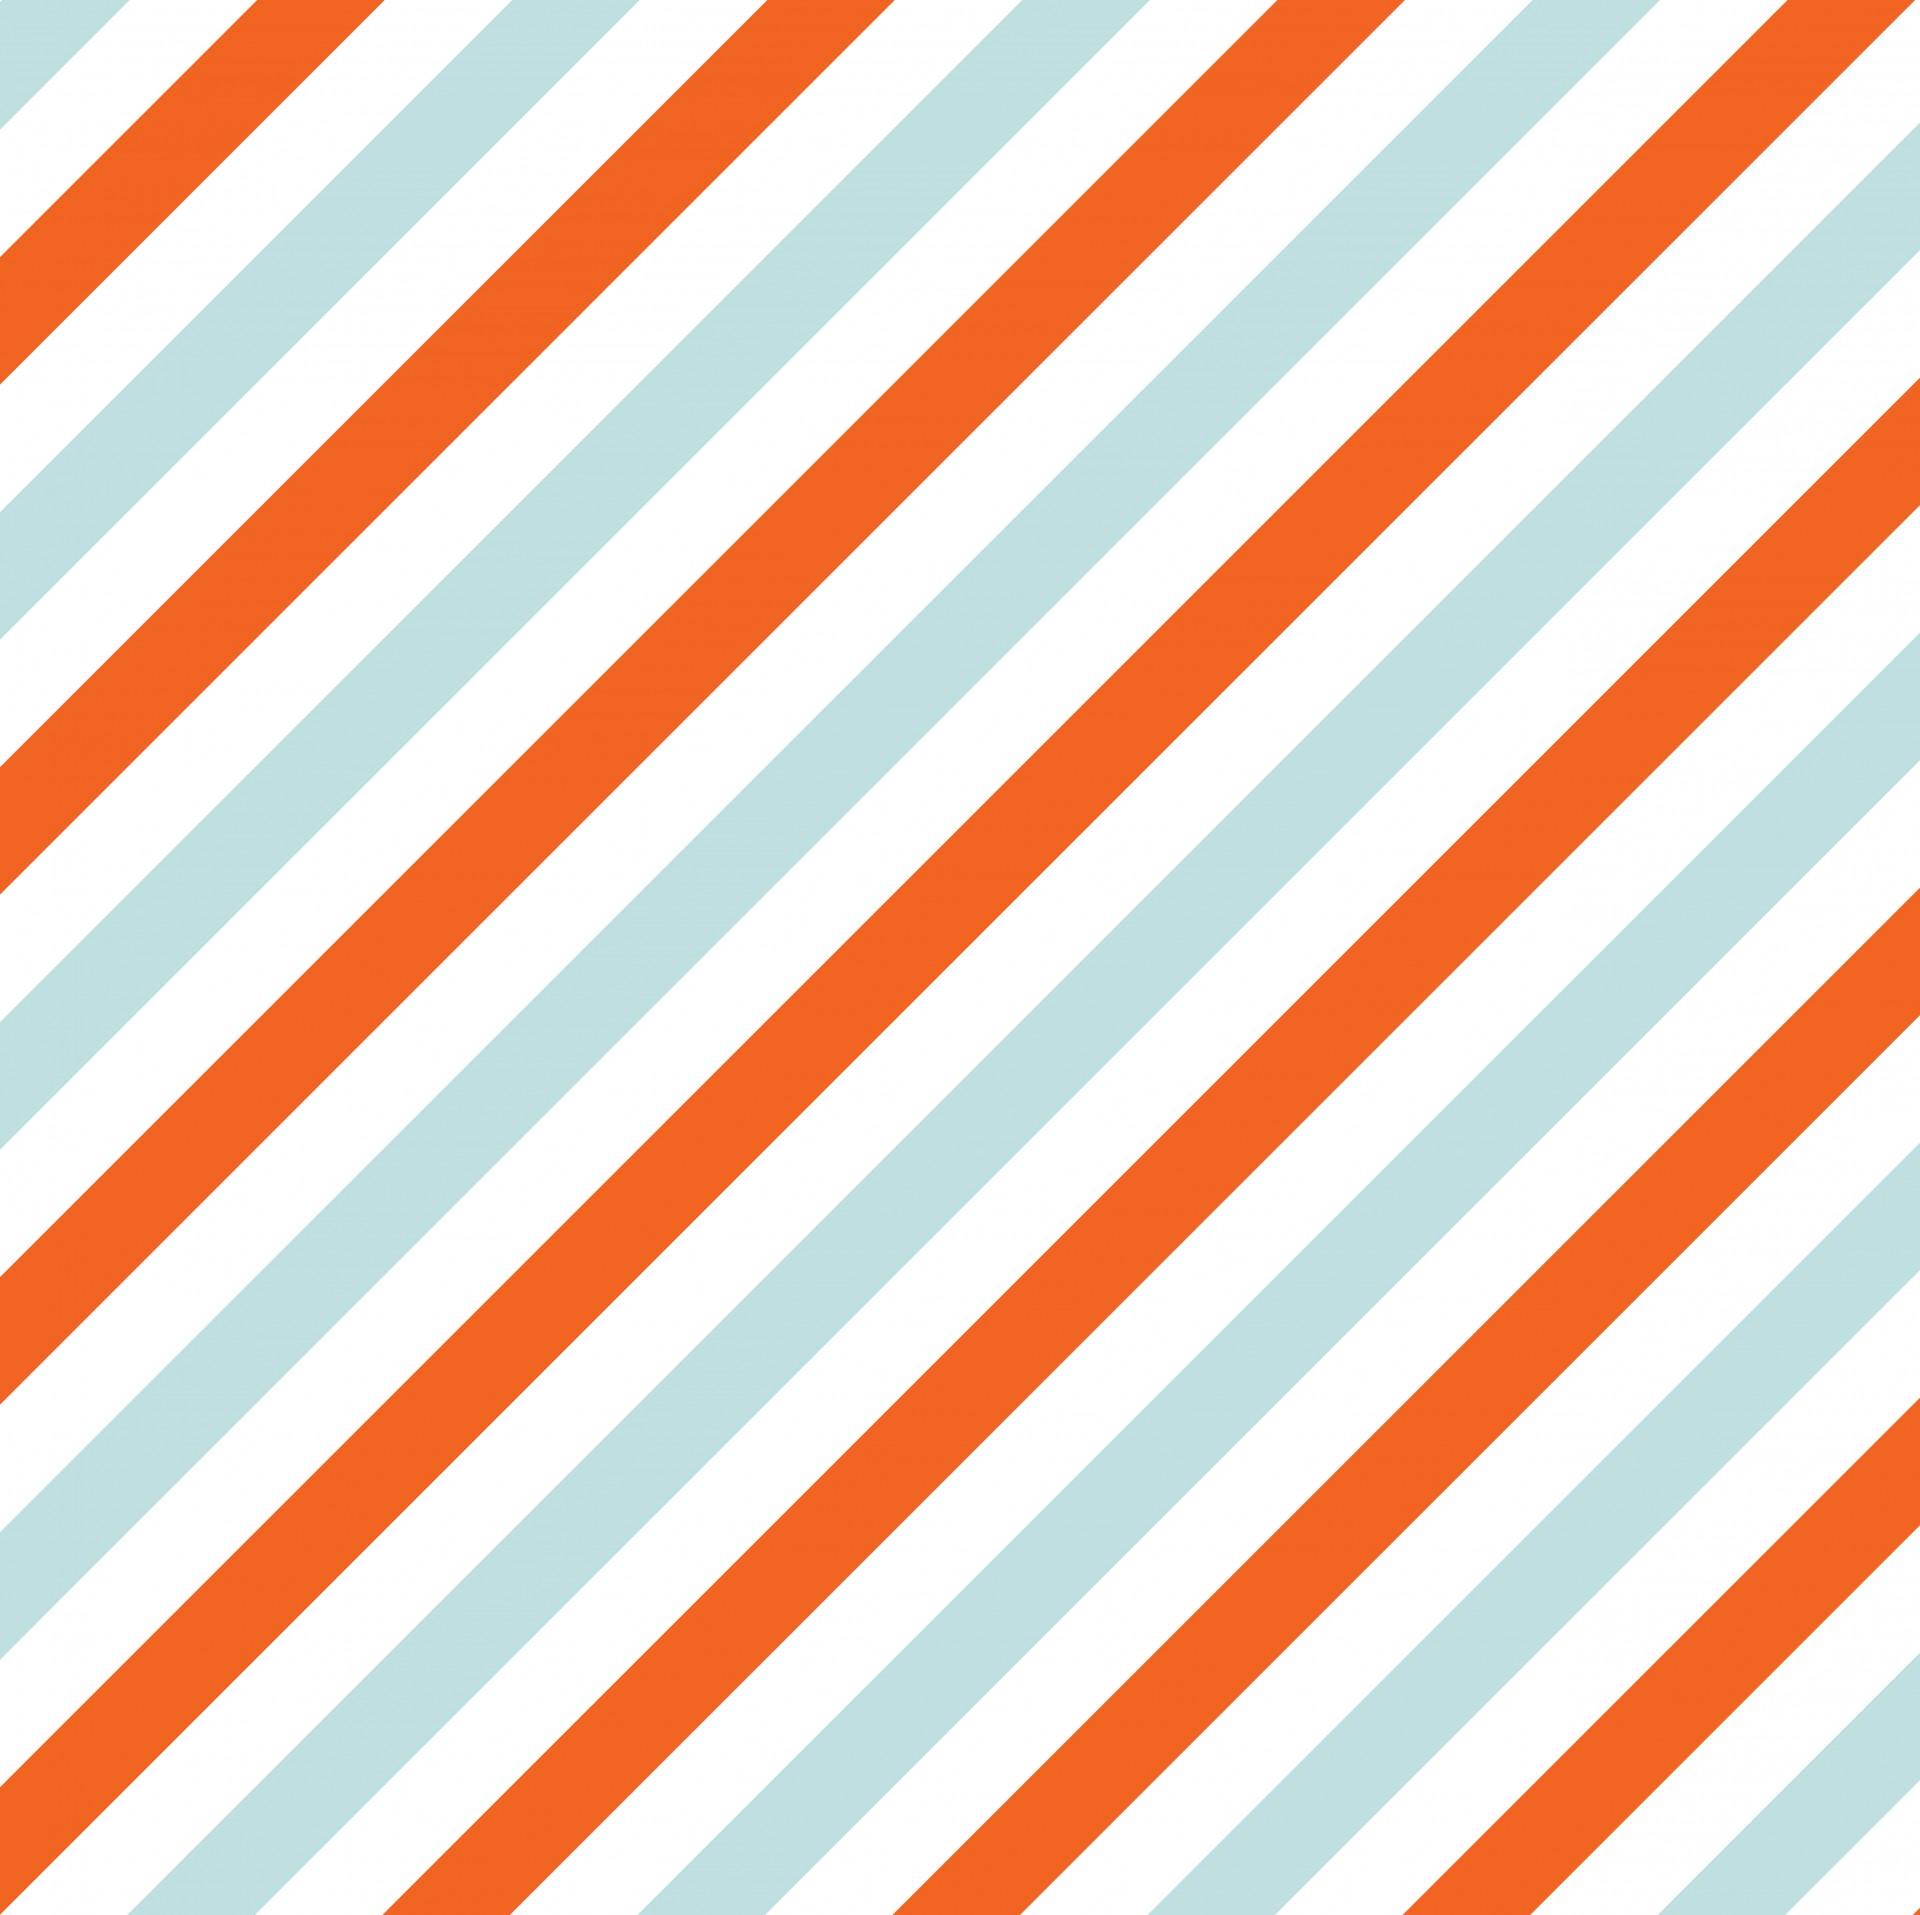 Striped Rainbow PPT Backgrounds